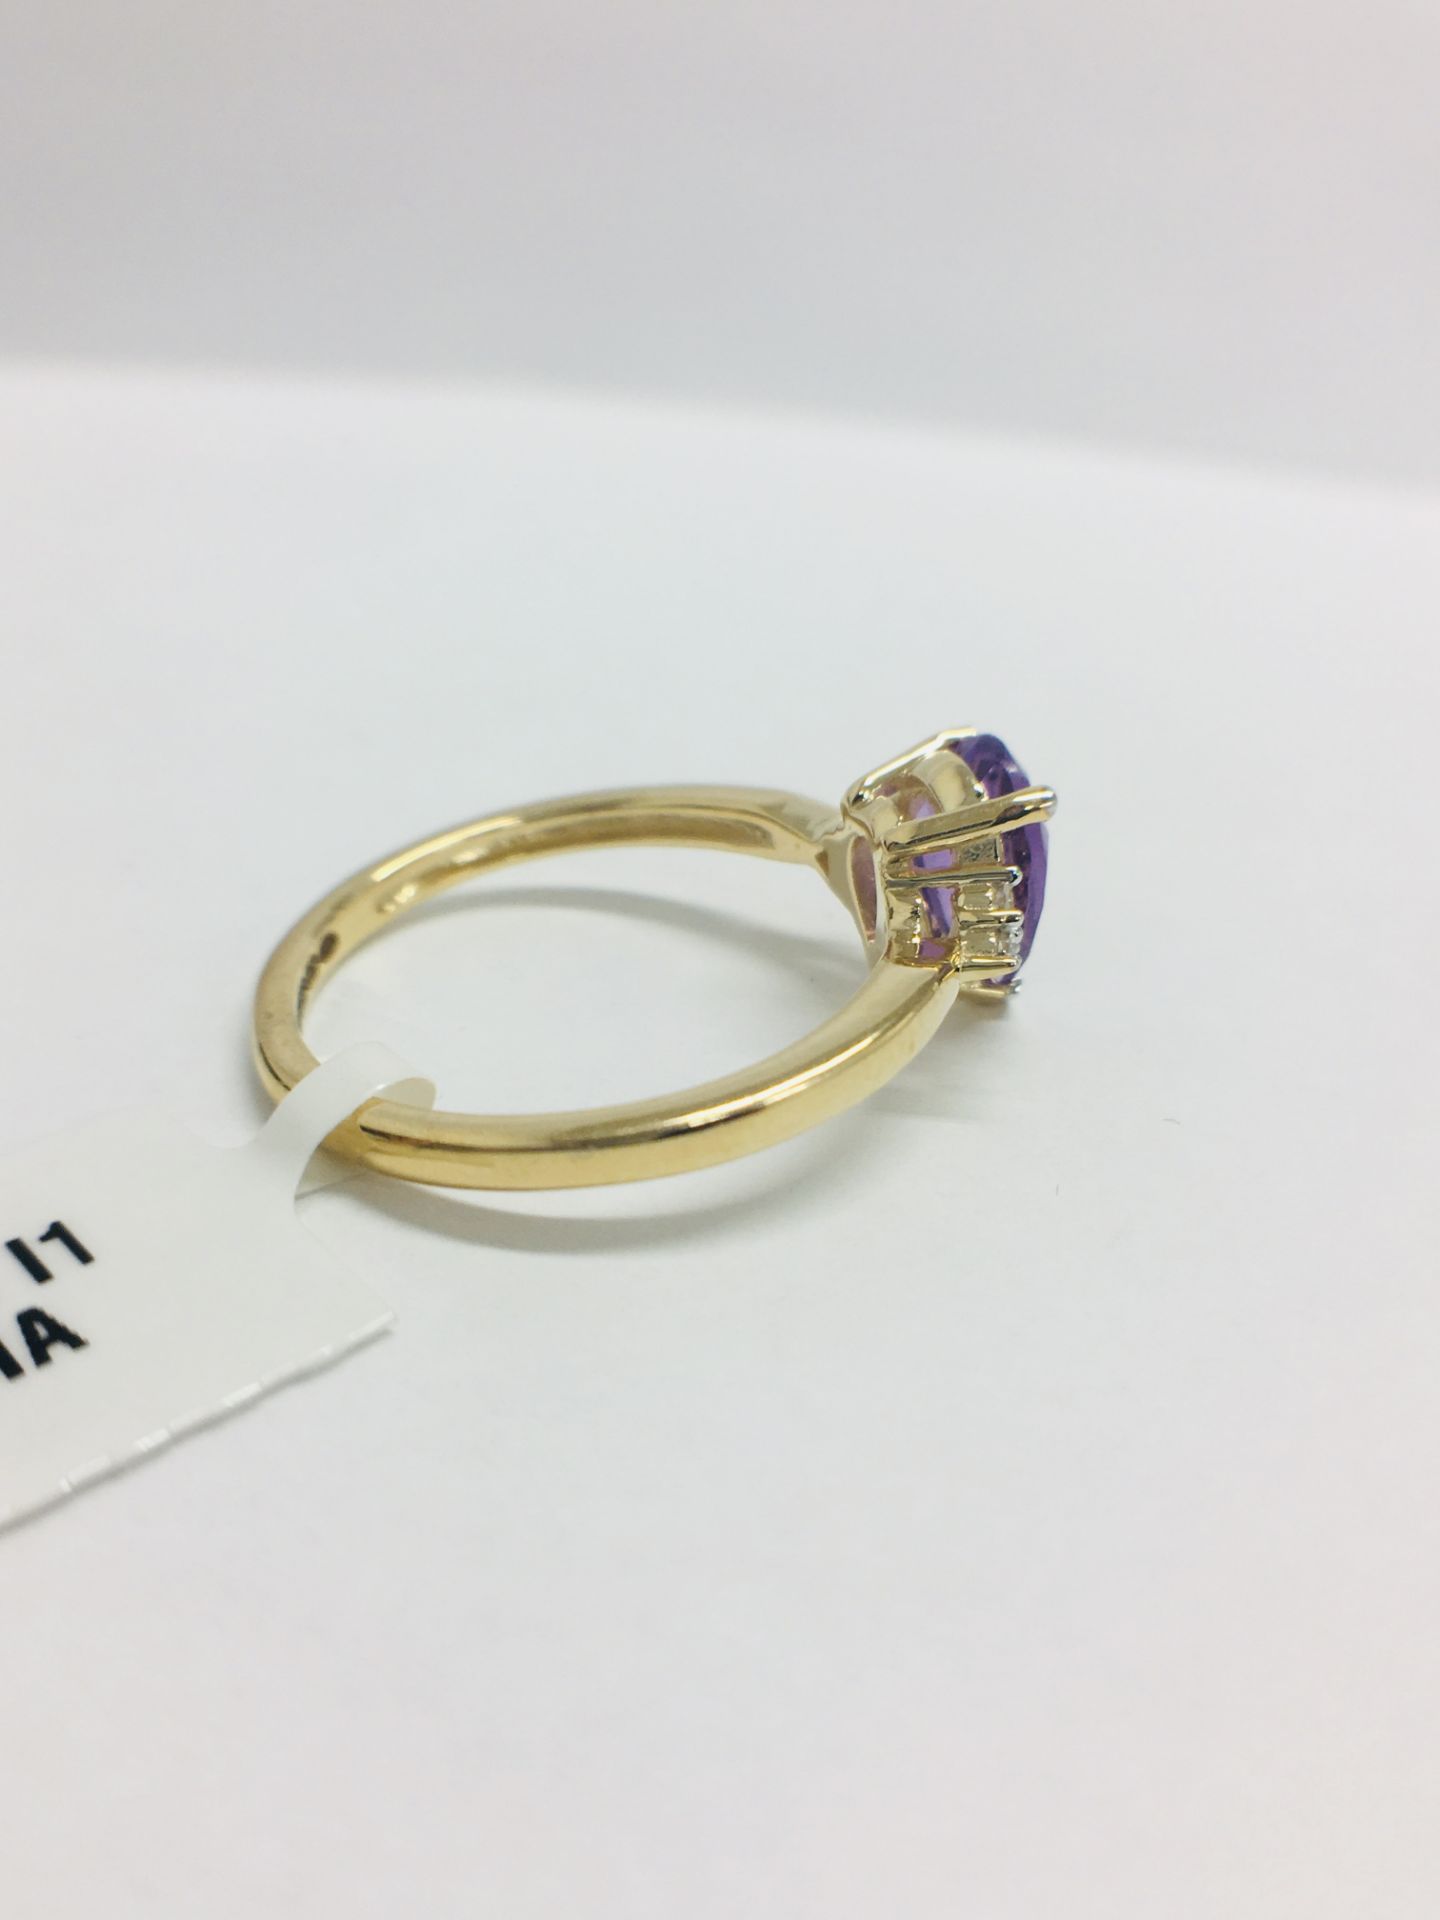 9ct Yellow Gold Amethyst Diamond Navette Style Dress Ring - Image 6 of 10